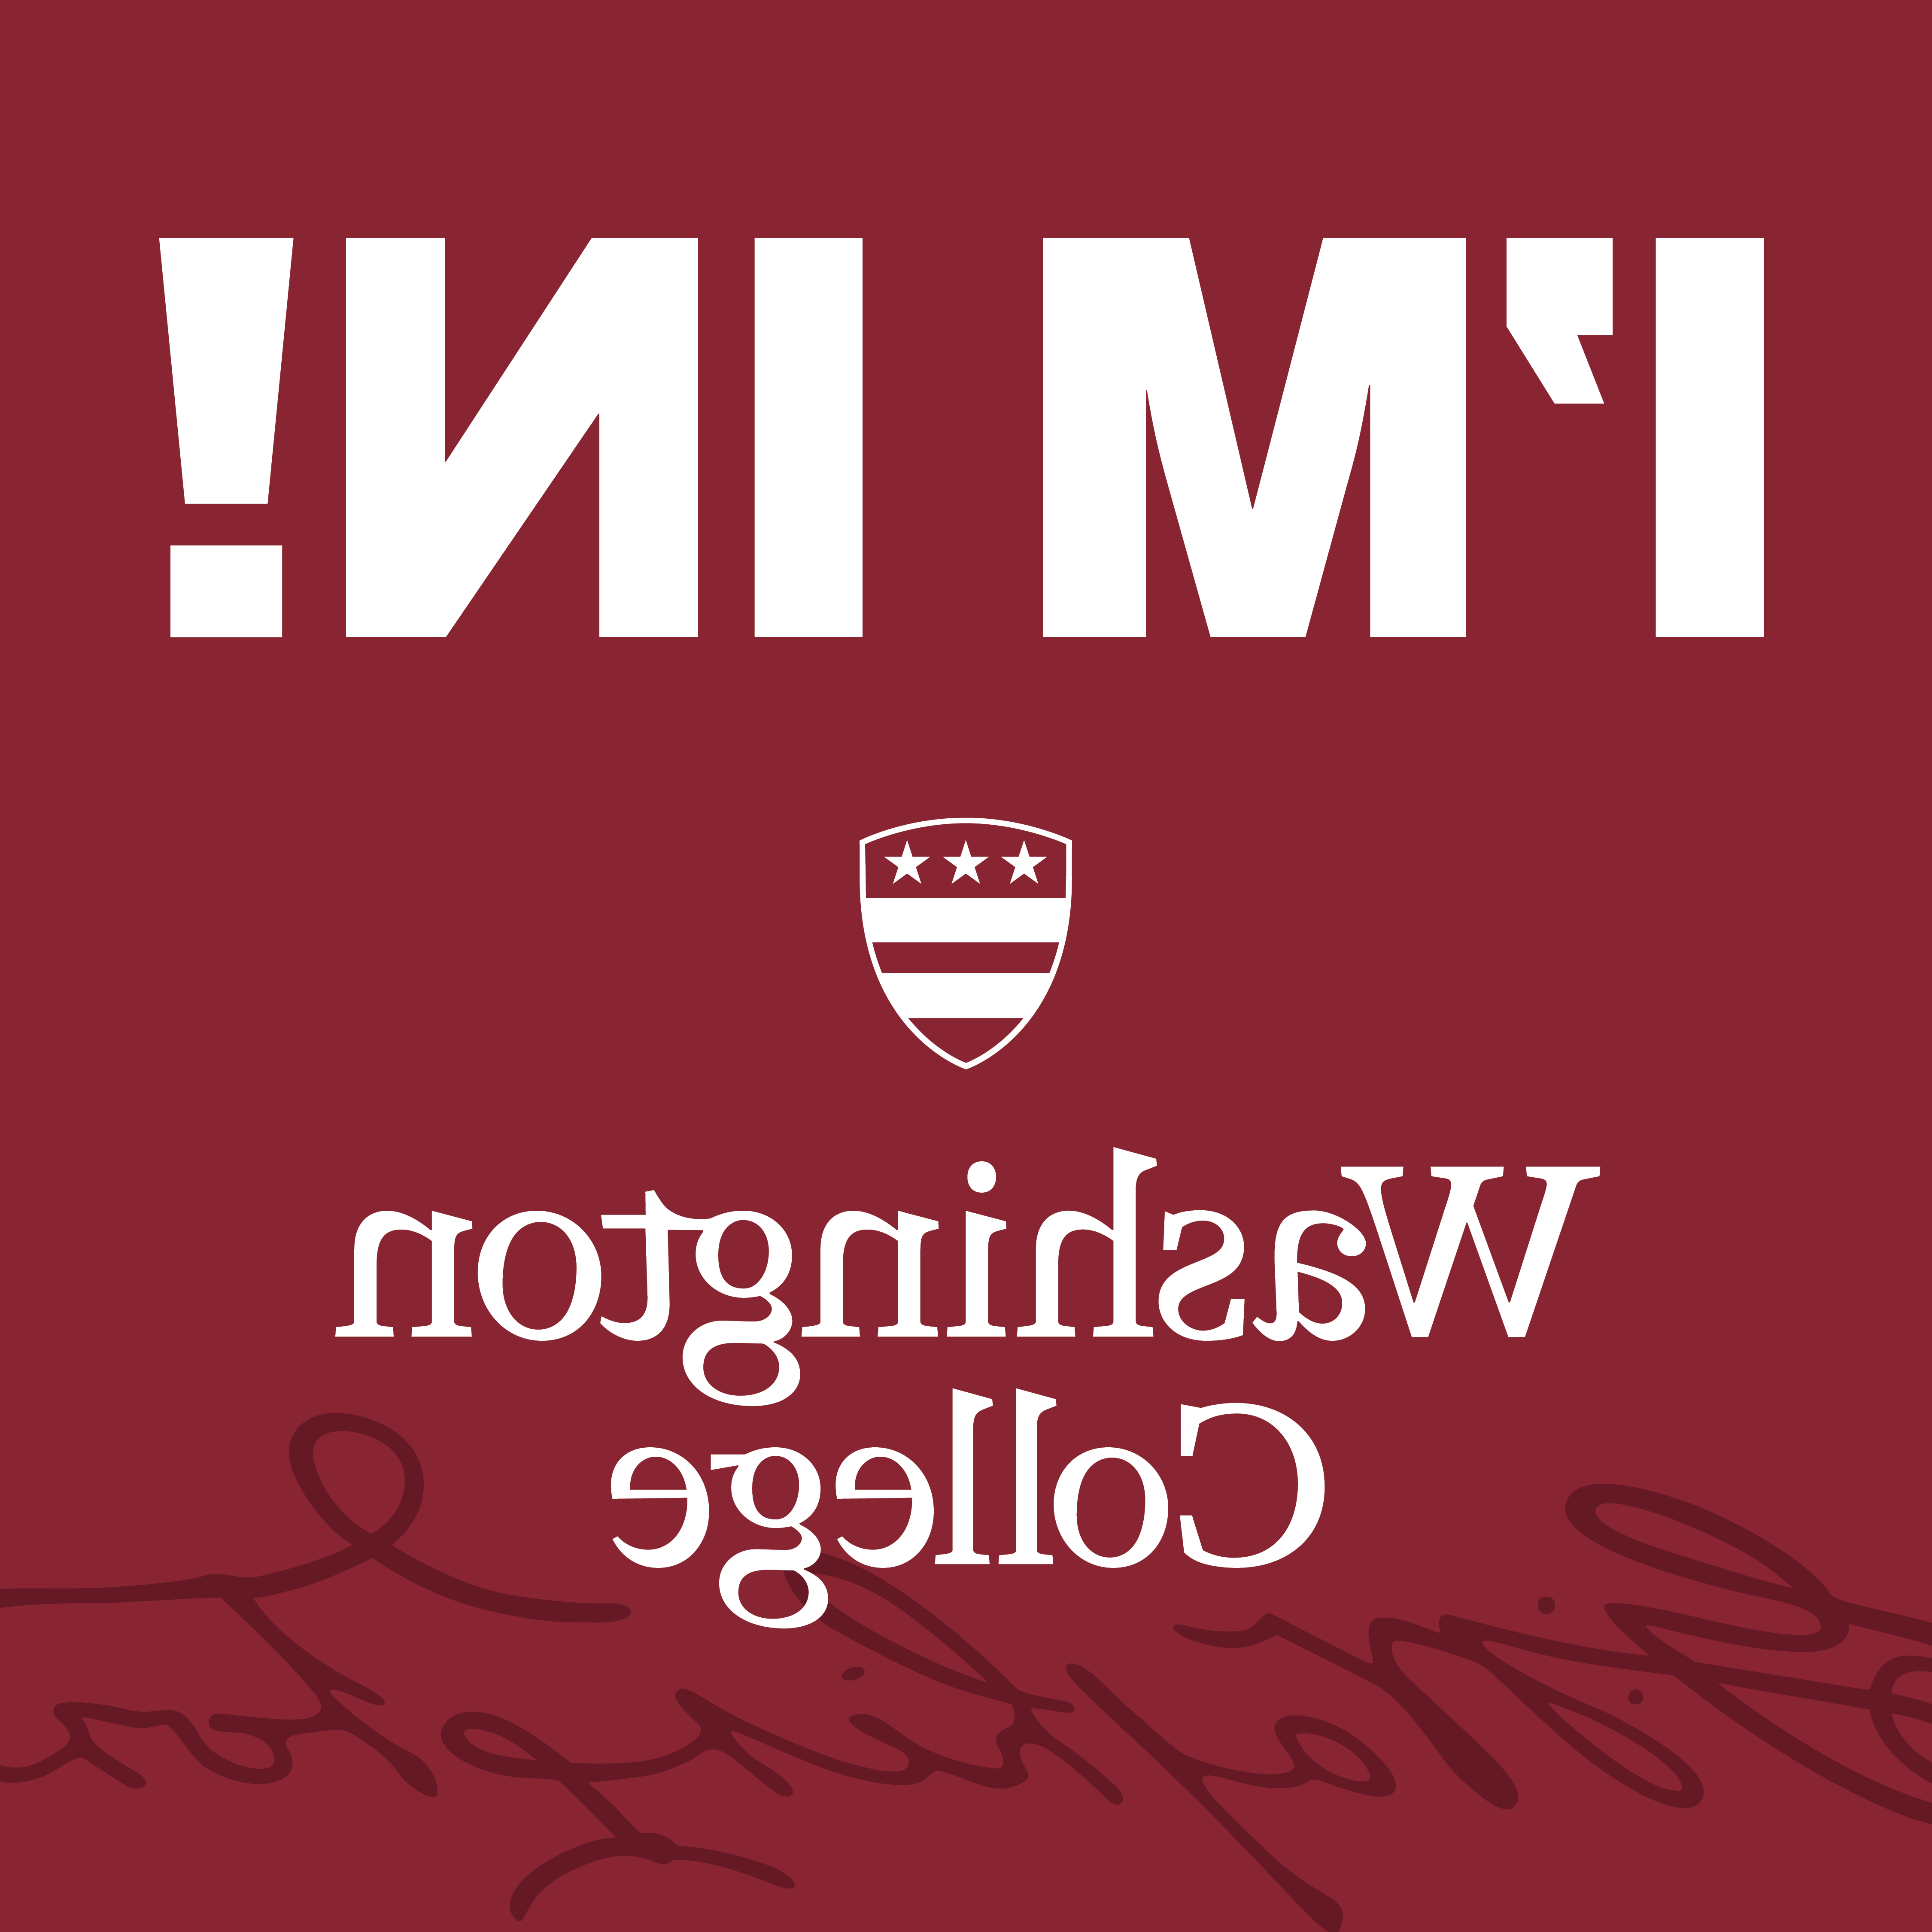 White text saying "I'm In - Washington College" with a small Washington family shield on a maroon field with a watermark of George Washington's signature